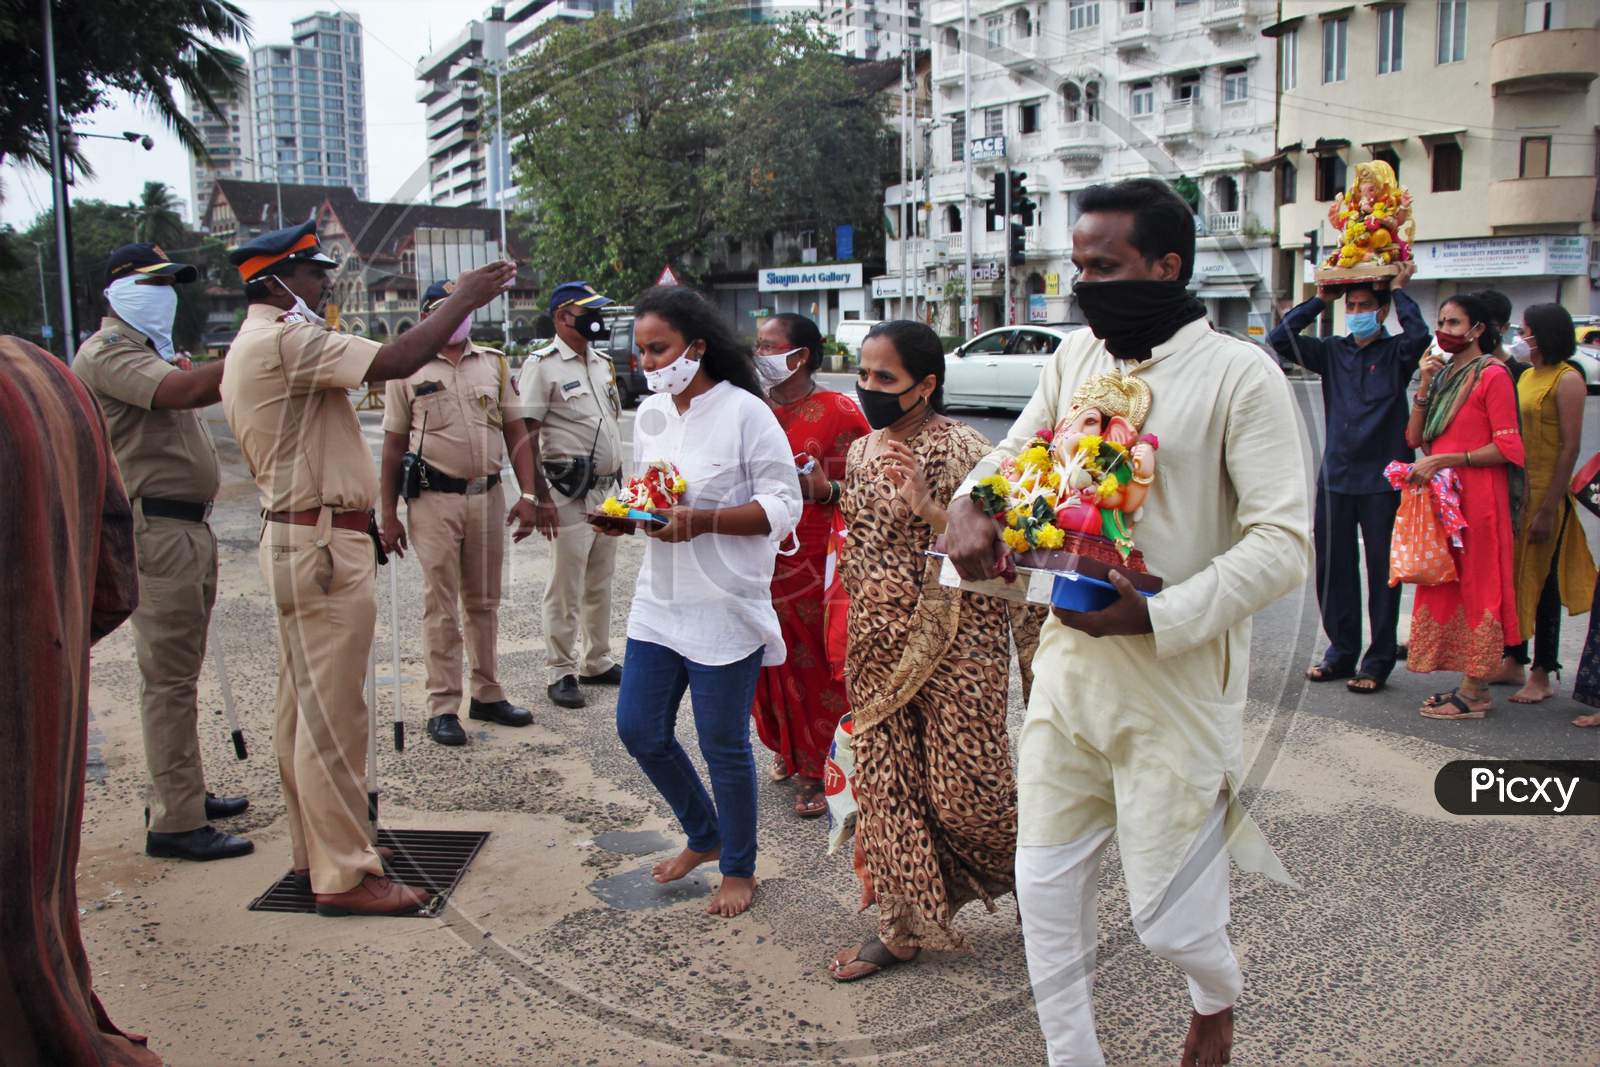 Police personnel are seen ensuring that only two family members with an idol enter for ganesh immersion at Girgoan Chowpatty, during the Ganesh Chaturthi festival in Mumbai, India on August 23, 2020.